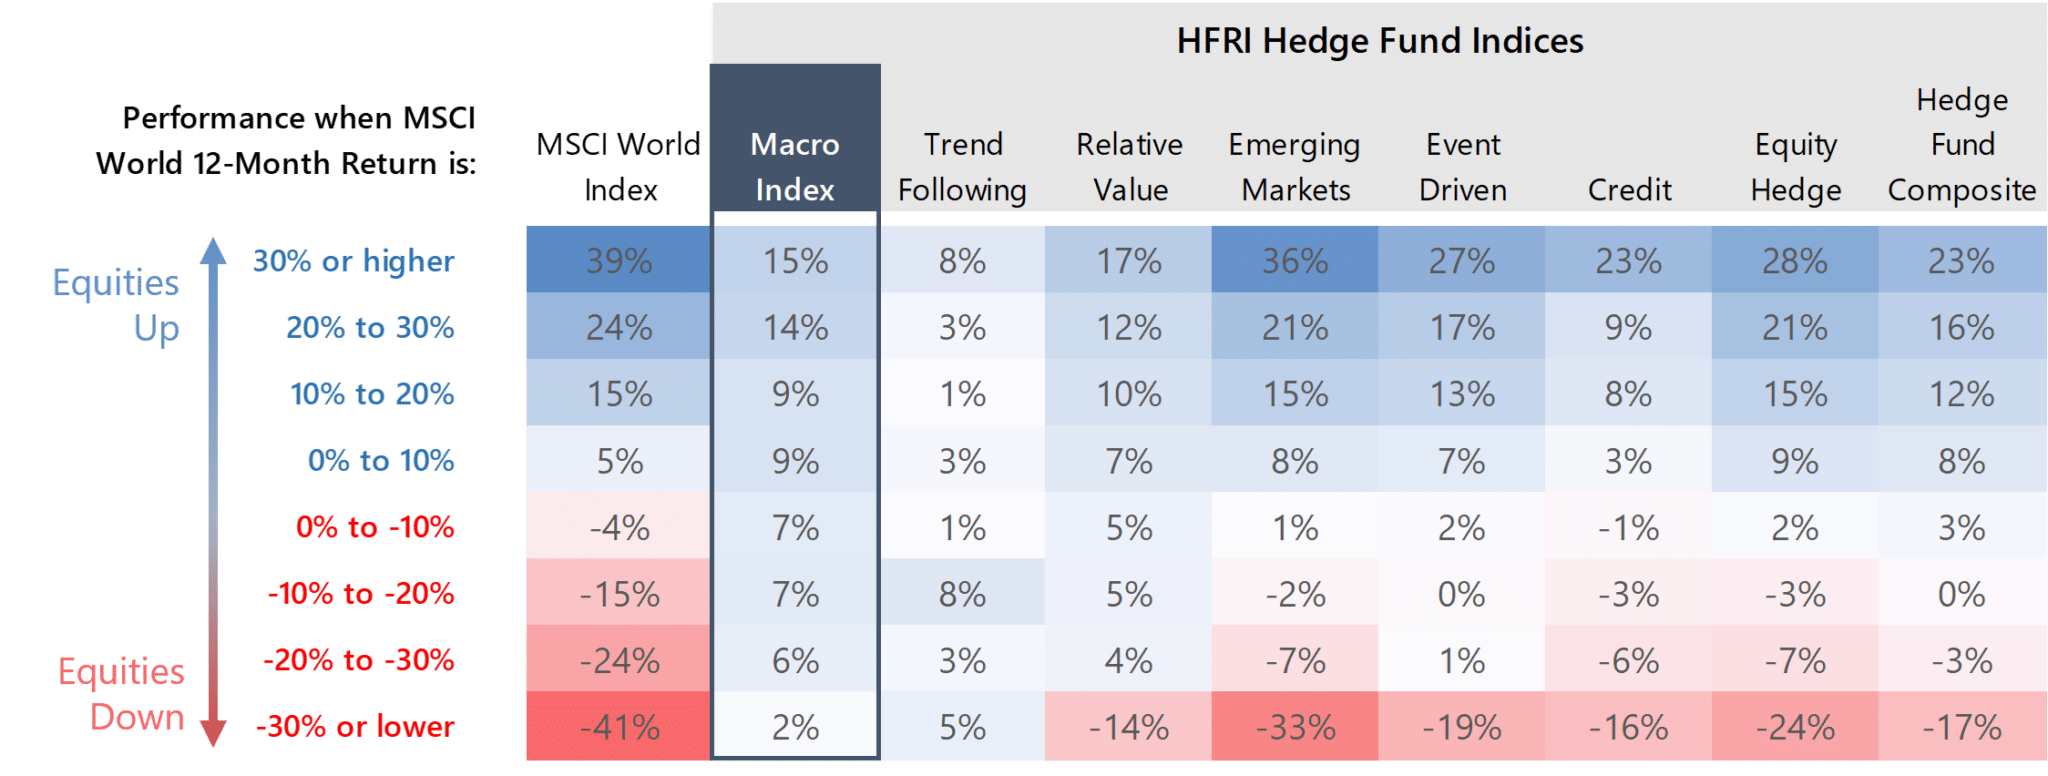 Performance of Macro and Hedge Fund Styles during various equity performance periods